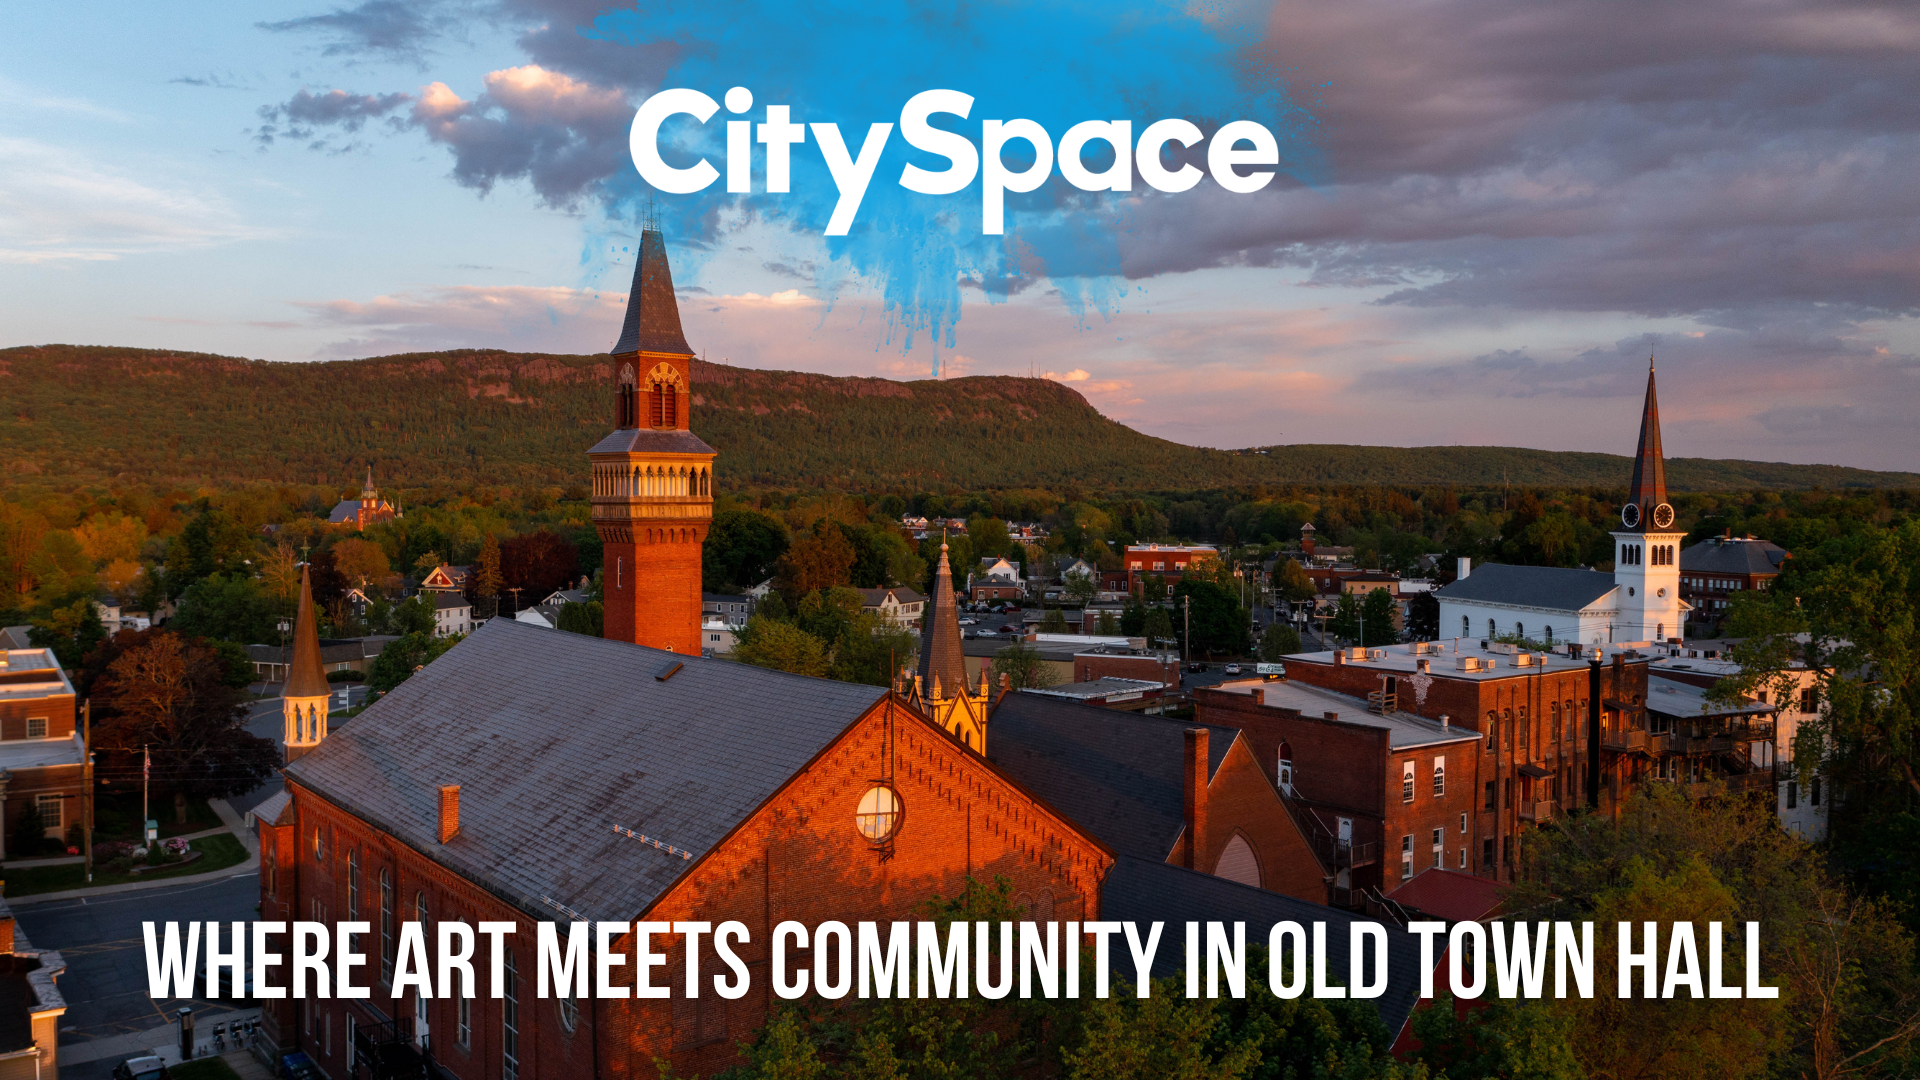 Scenic view of historic old town hall building with mountain landscape in the background. CitySpace Where Art Meets Community in Old Town Hall